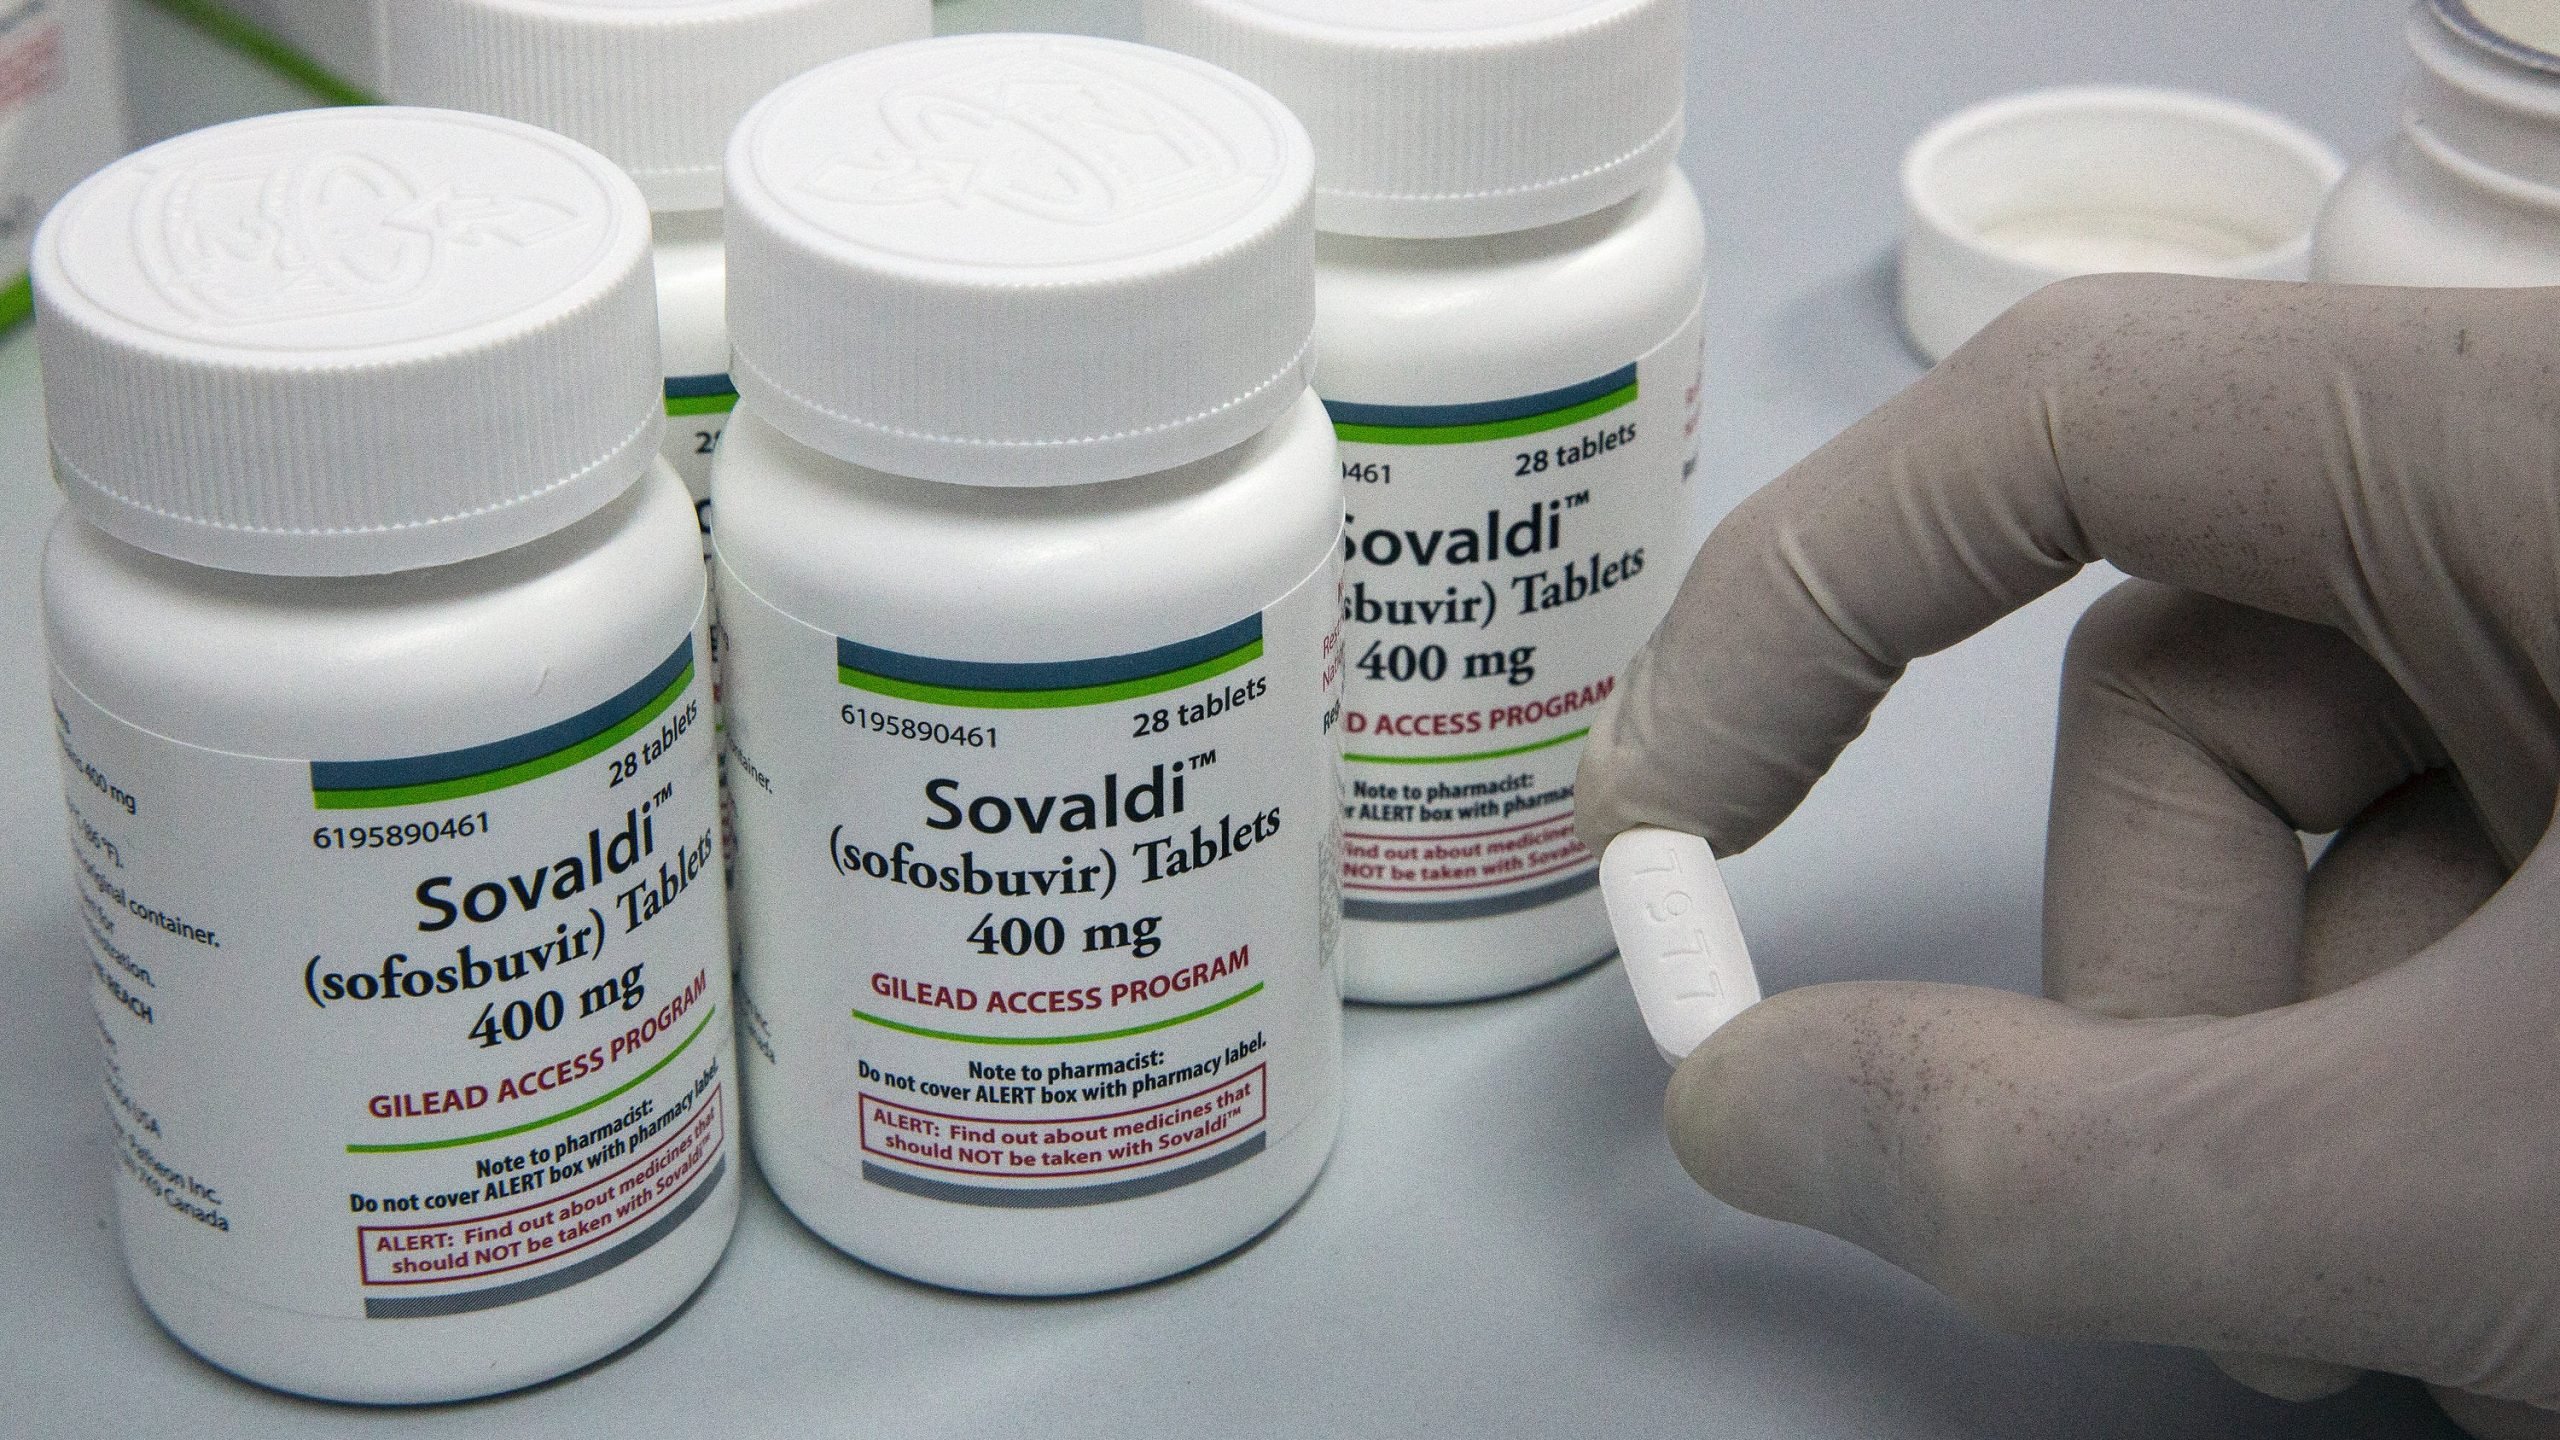 Hepatitis C Deaths in U.S. Rose in 2014, but New Drugs Hold Promise ...